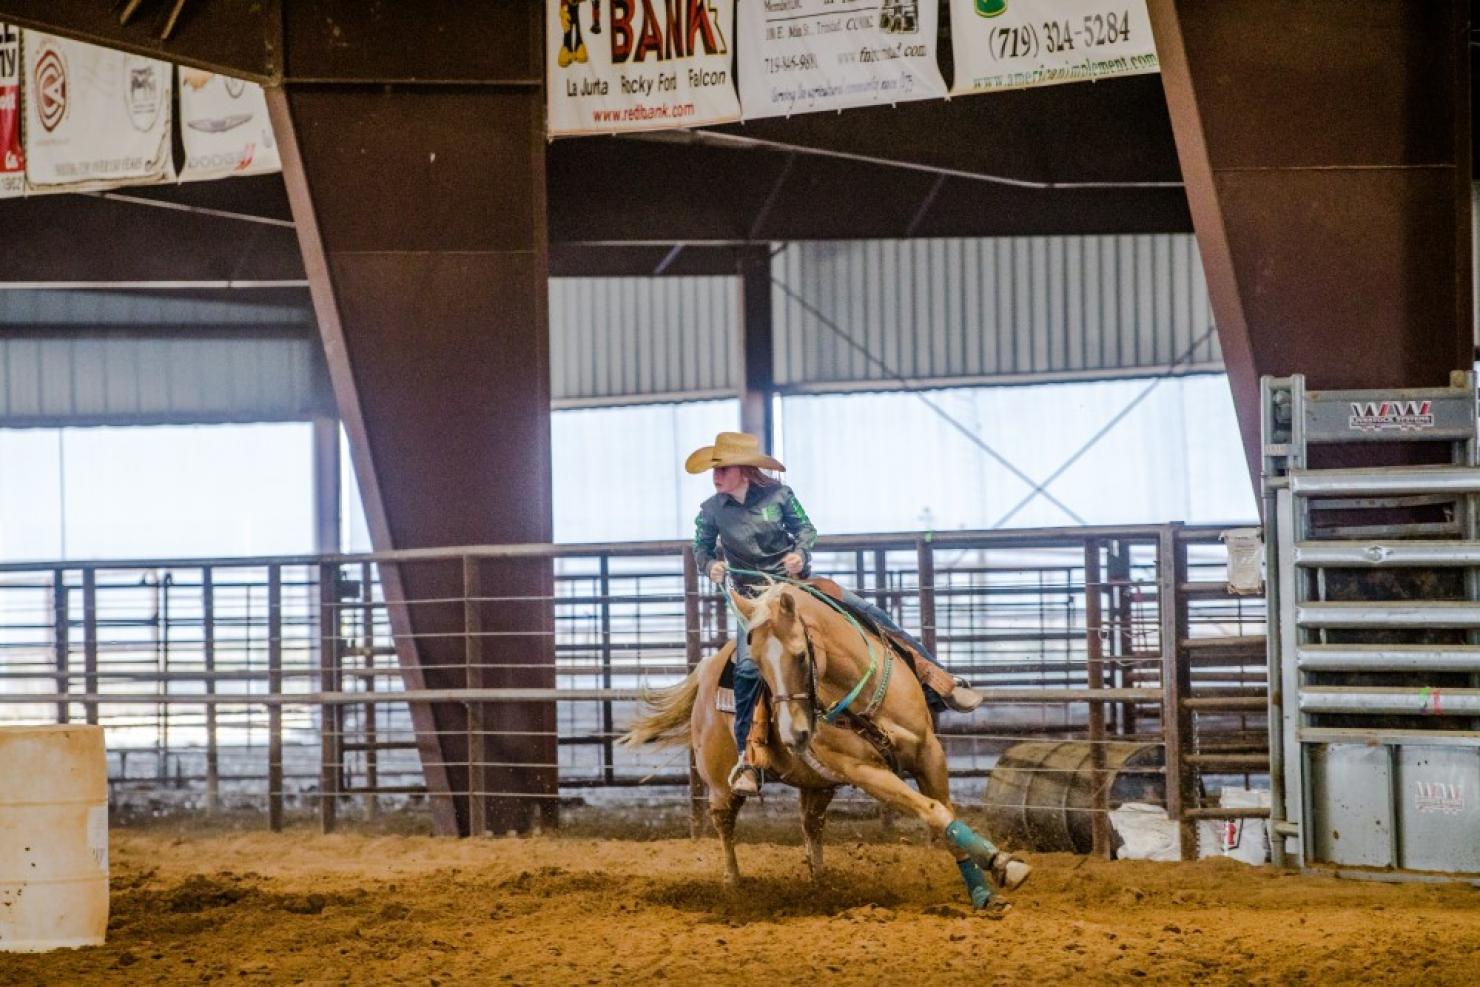 A barrel racer rounds a turn on her horse during the Little Britches Rodeo in Kim, Colorado. Photo by Moxie82 Inc.